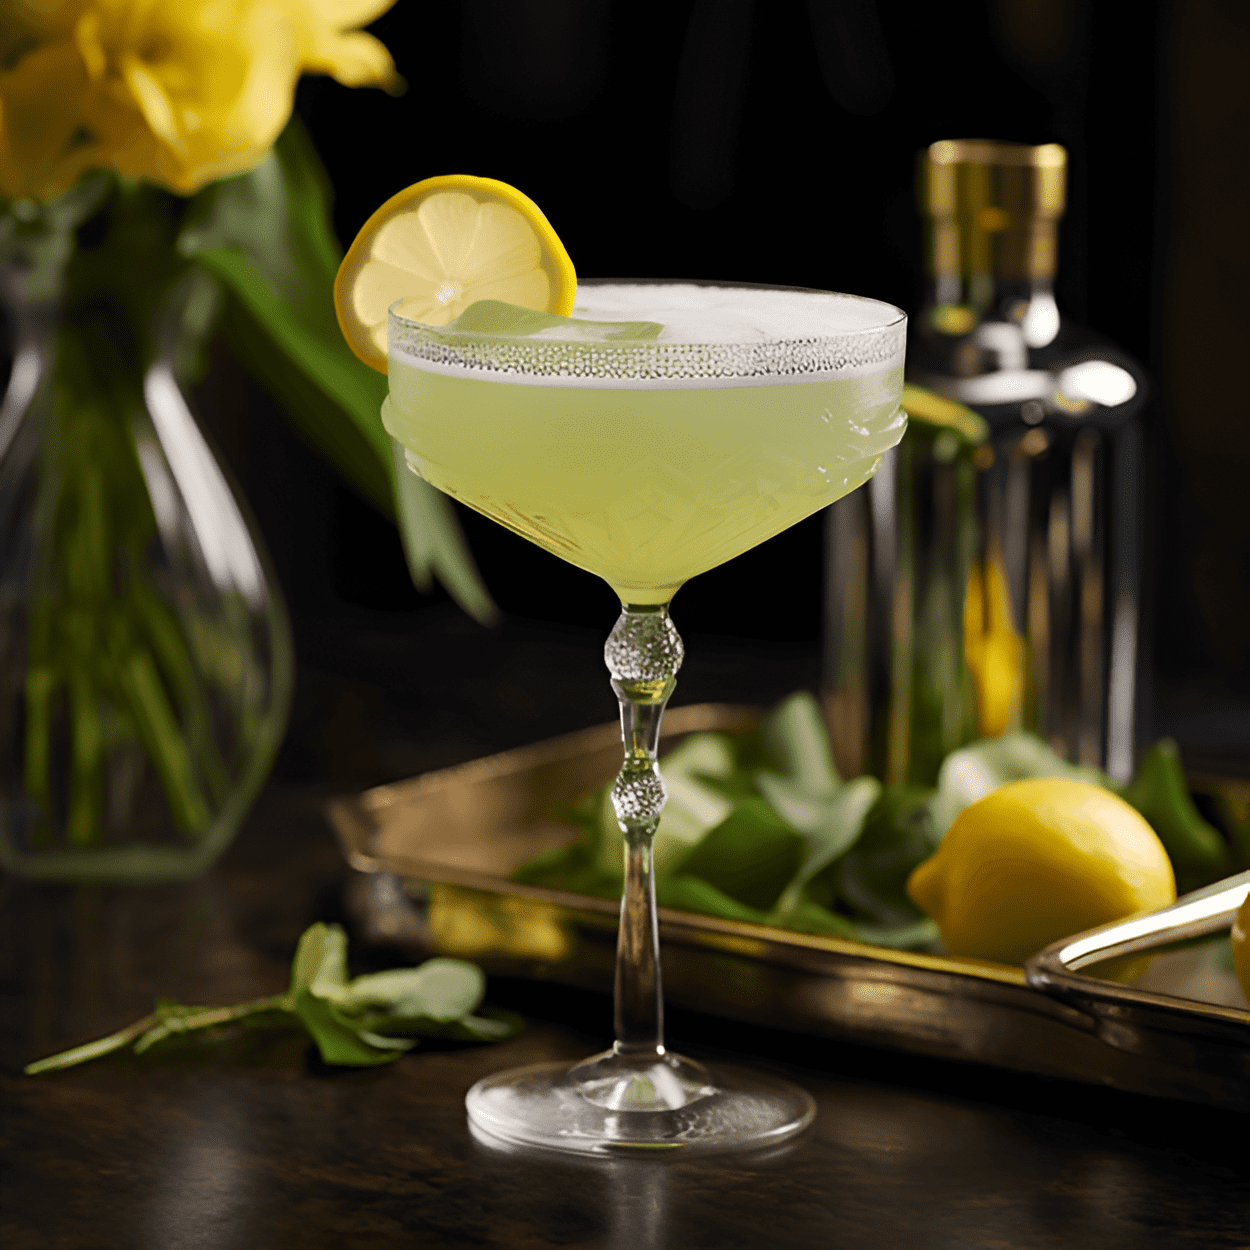 Balalaika Cocktail Recipe - The Balalaika cocktail has a refreshing, citrusy, and slightly sweet taste. It is well-balanced with a hint of tartness from the lemon juice and a smooth, velvety texture from the vodka and triple sec.